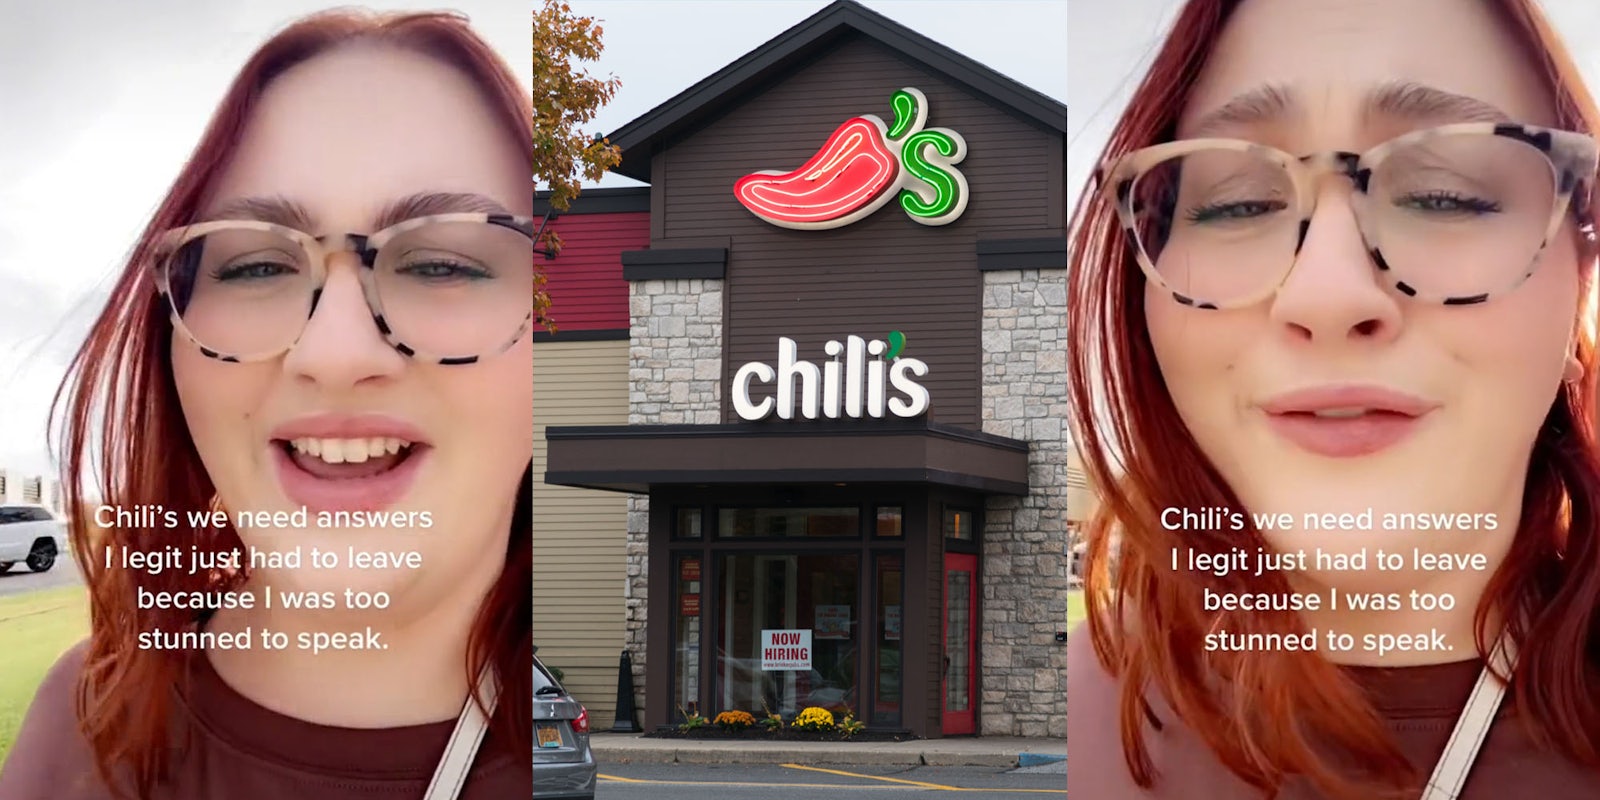 woman walking outside speaking caption 'Chili's we need answers I legit just had to leave because I was too stunned to speak.' (l) Chili's restaurant building (c)woman walking outside speaking caption 'Chili's we need answers I legit just had to leave because I was too stunned to speak.' (r)